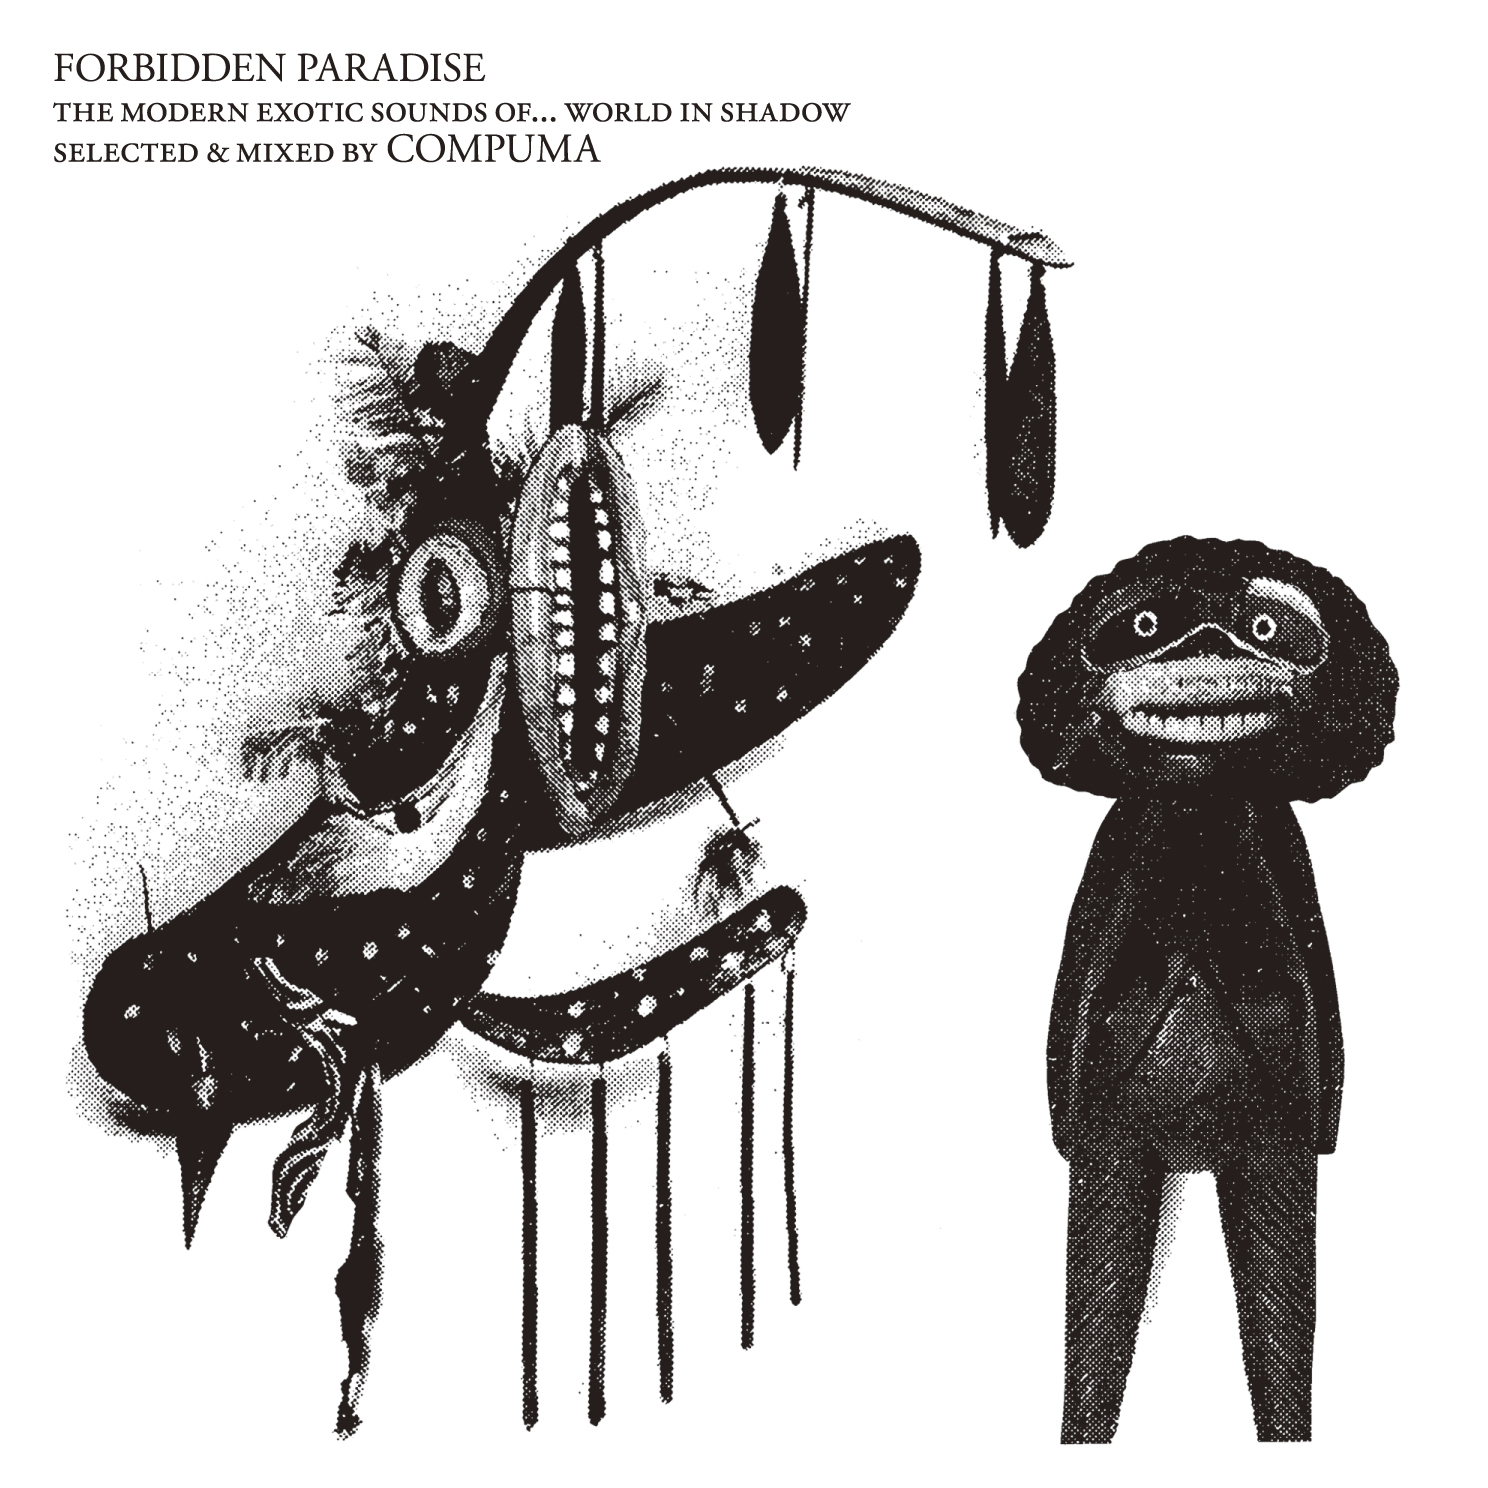 FORBIDDEN PARADISE - the modern exotic sounds of...world in shadow